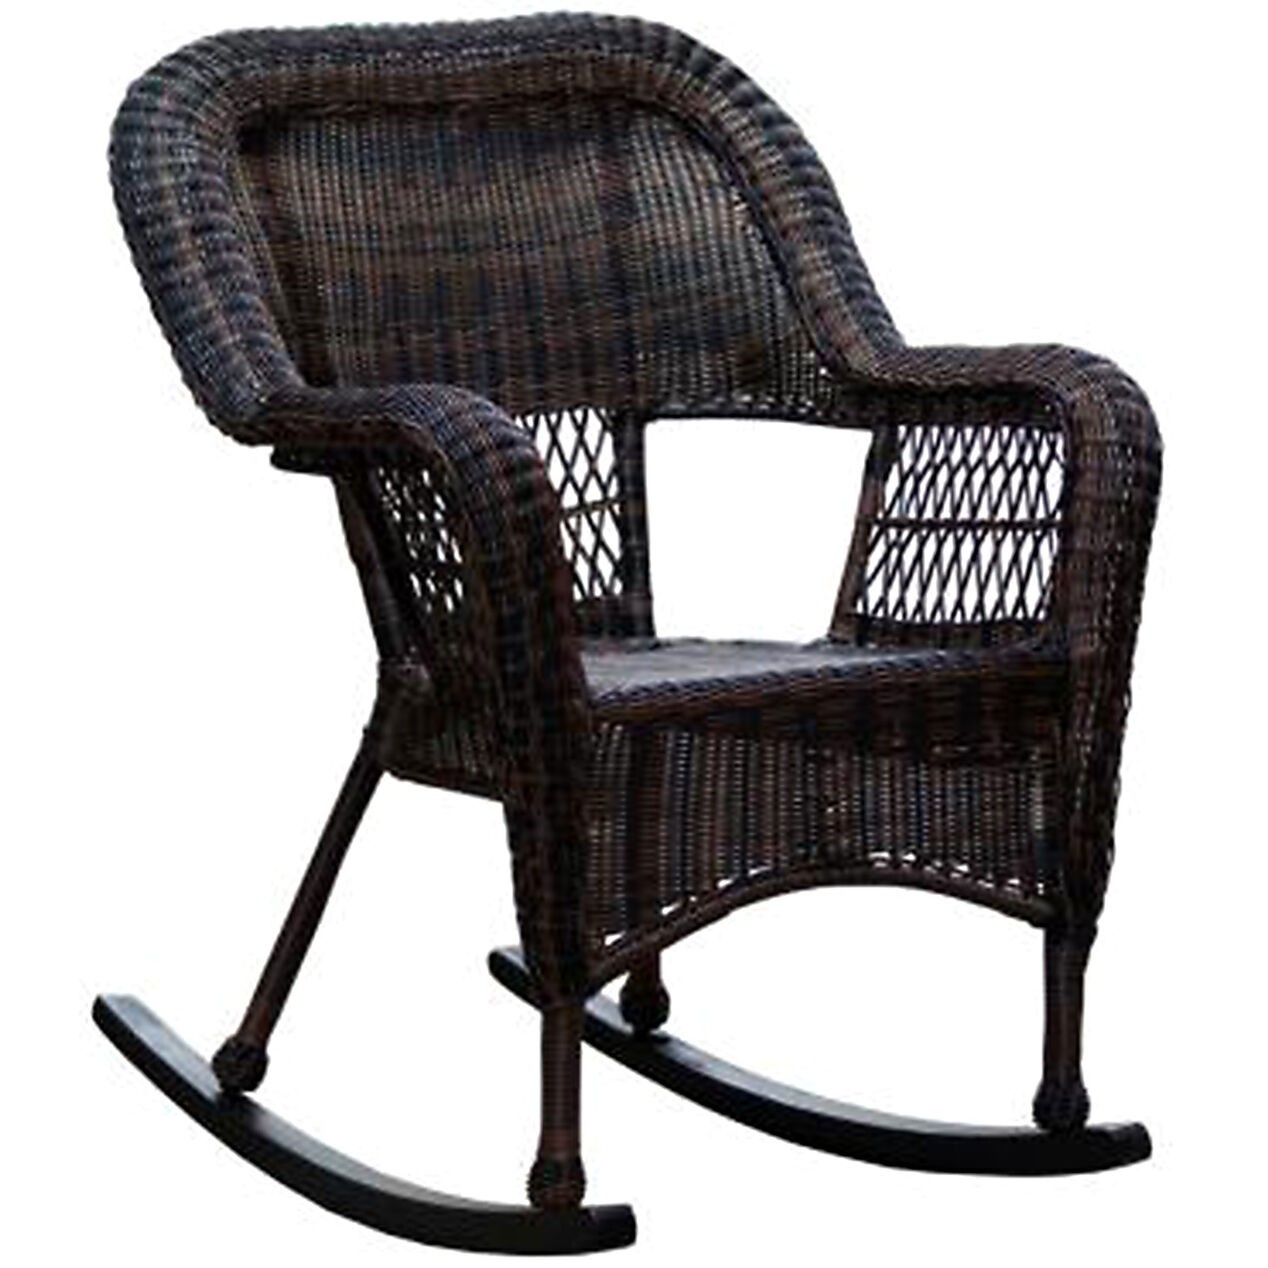 Dark brown wicker outdoor patio rocking chair at home 1